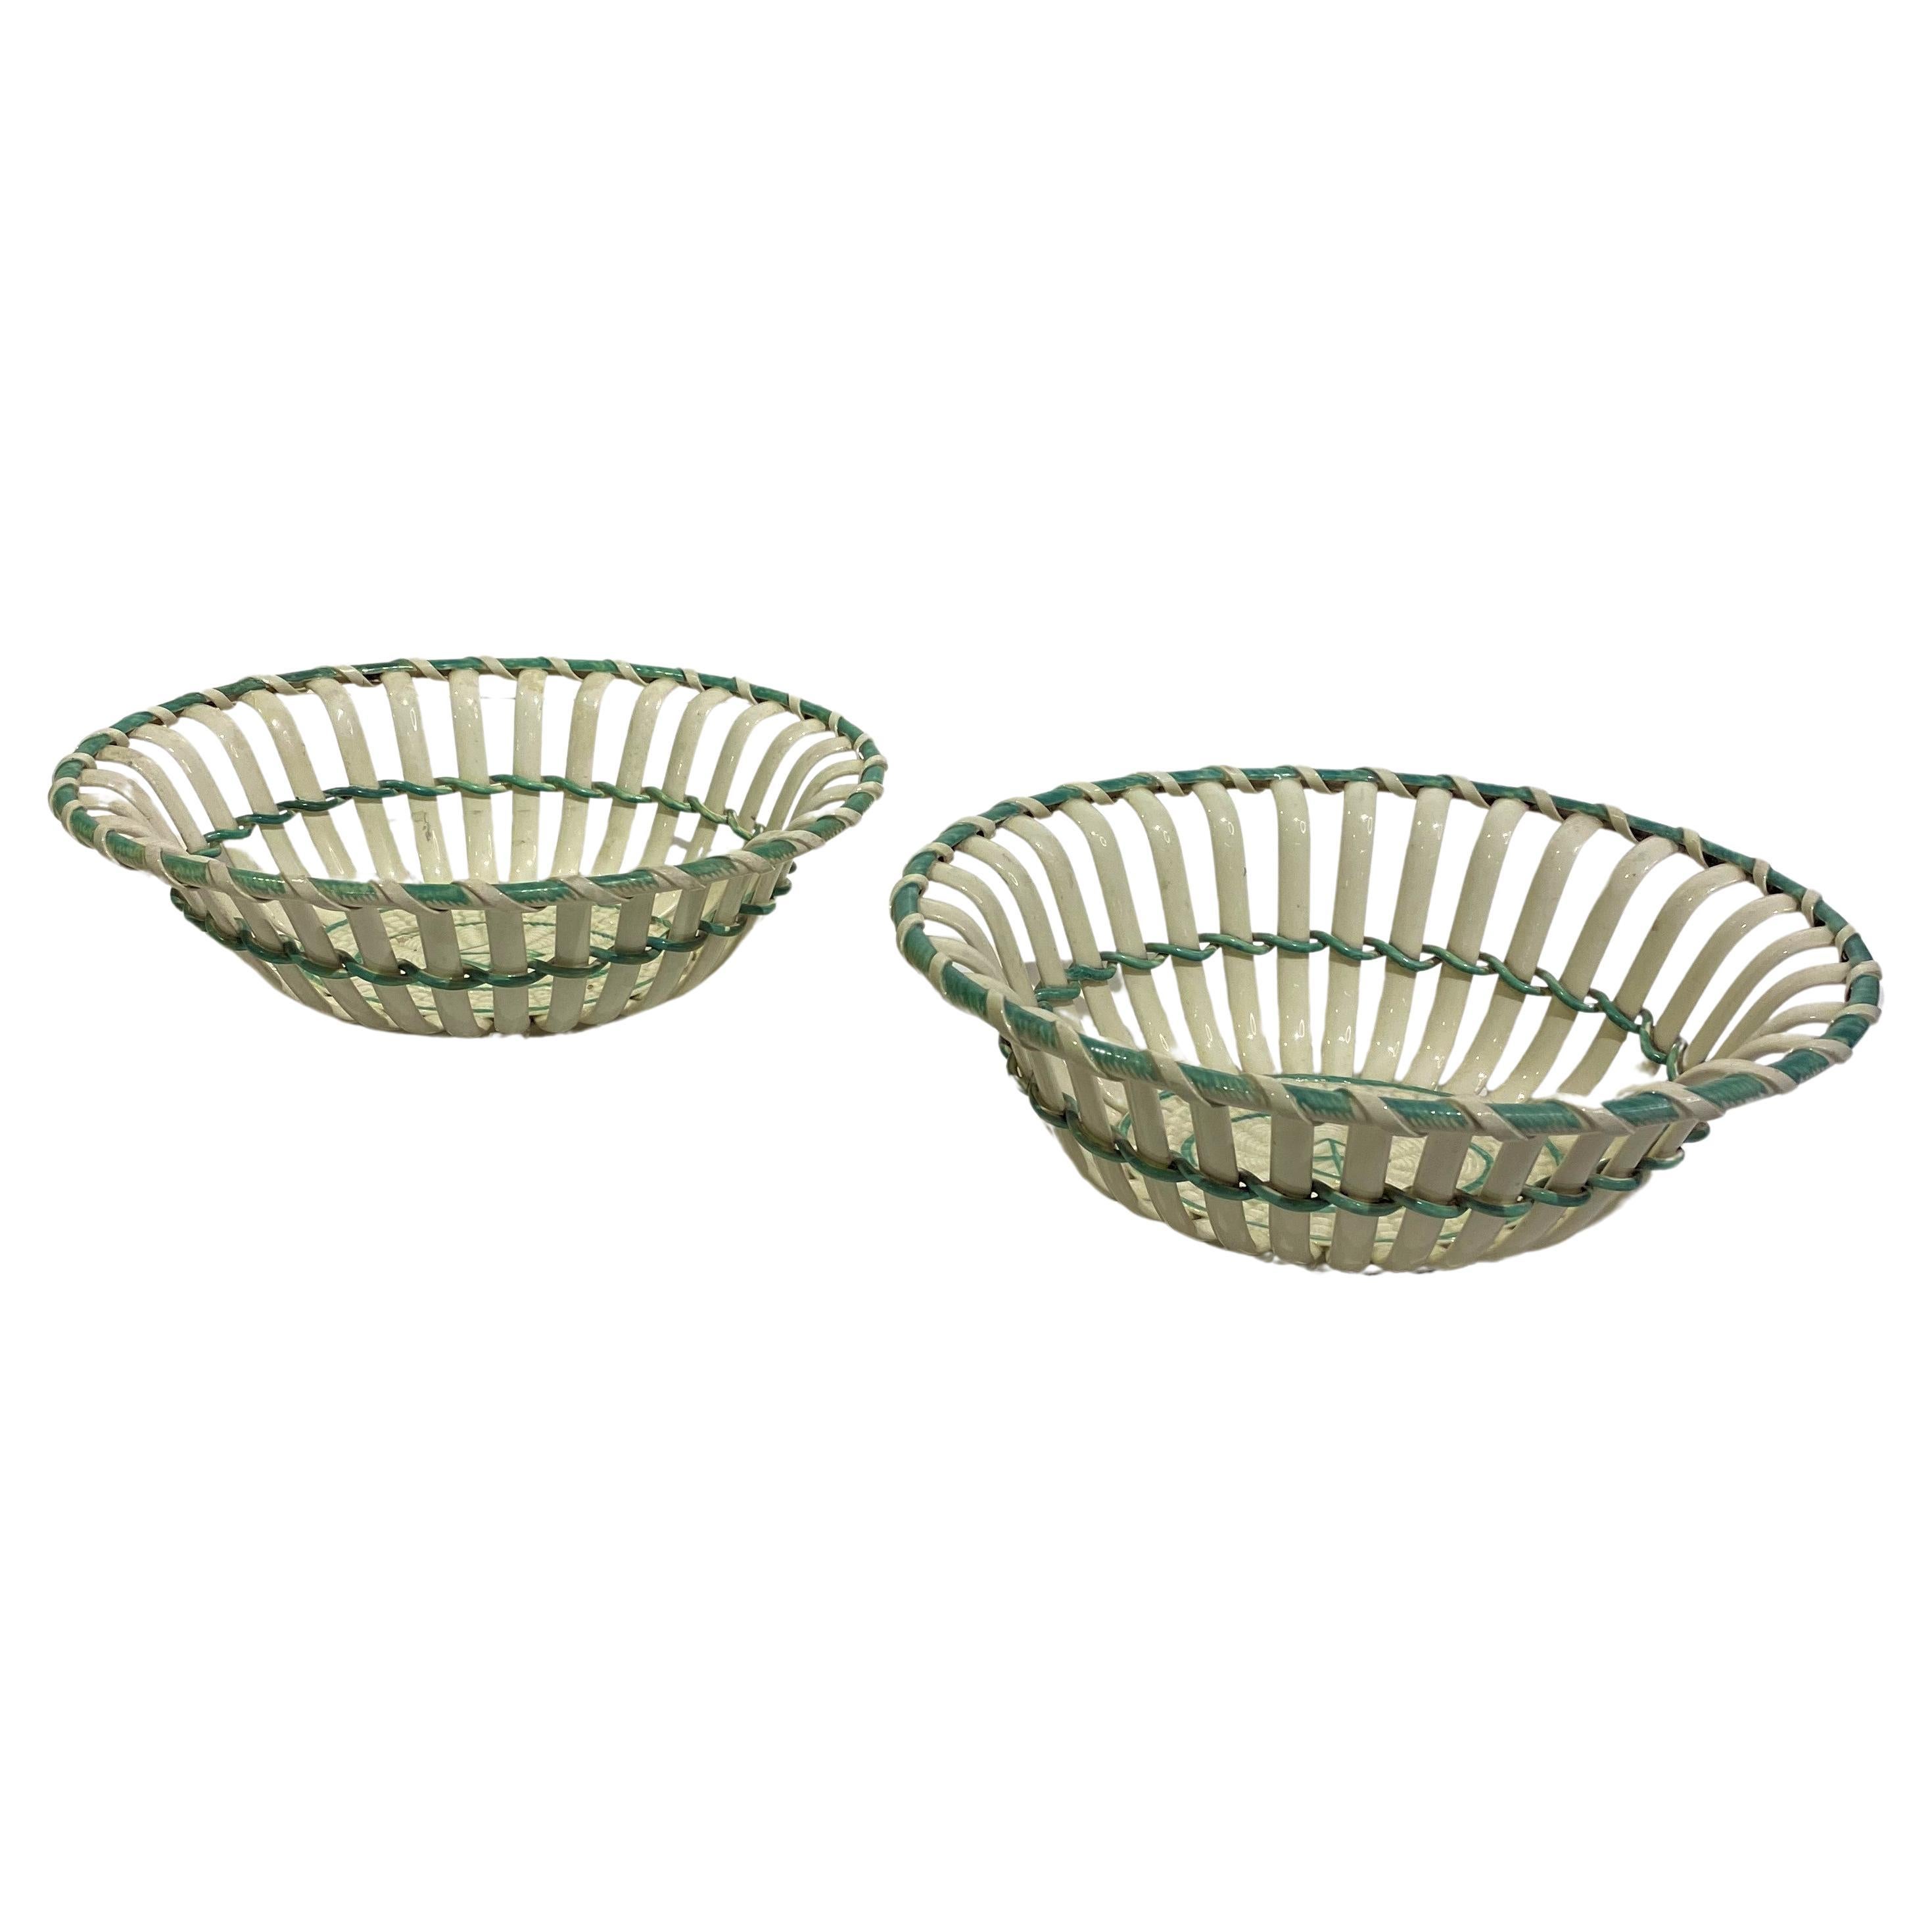 Pair of 19th Century Bi-Color Pierced Baskets from England For Sale